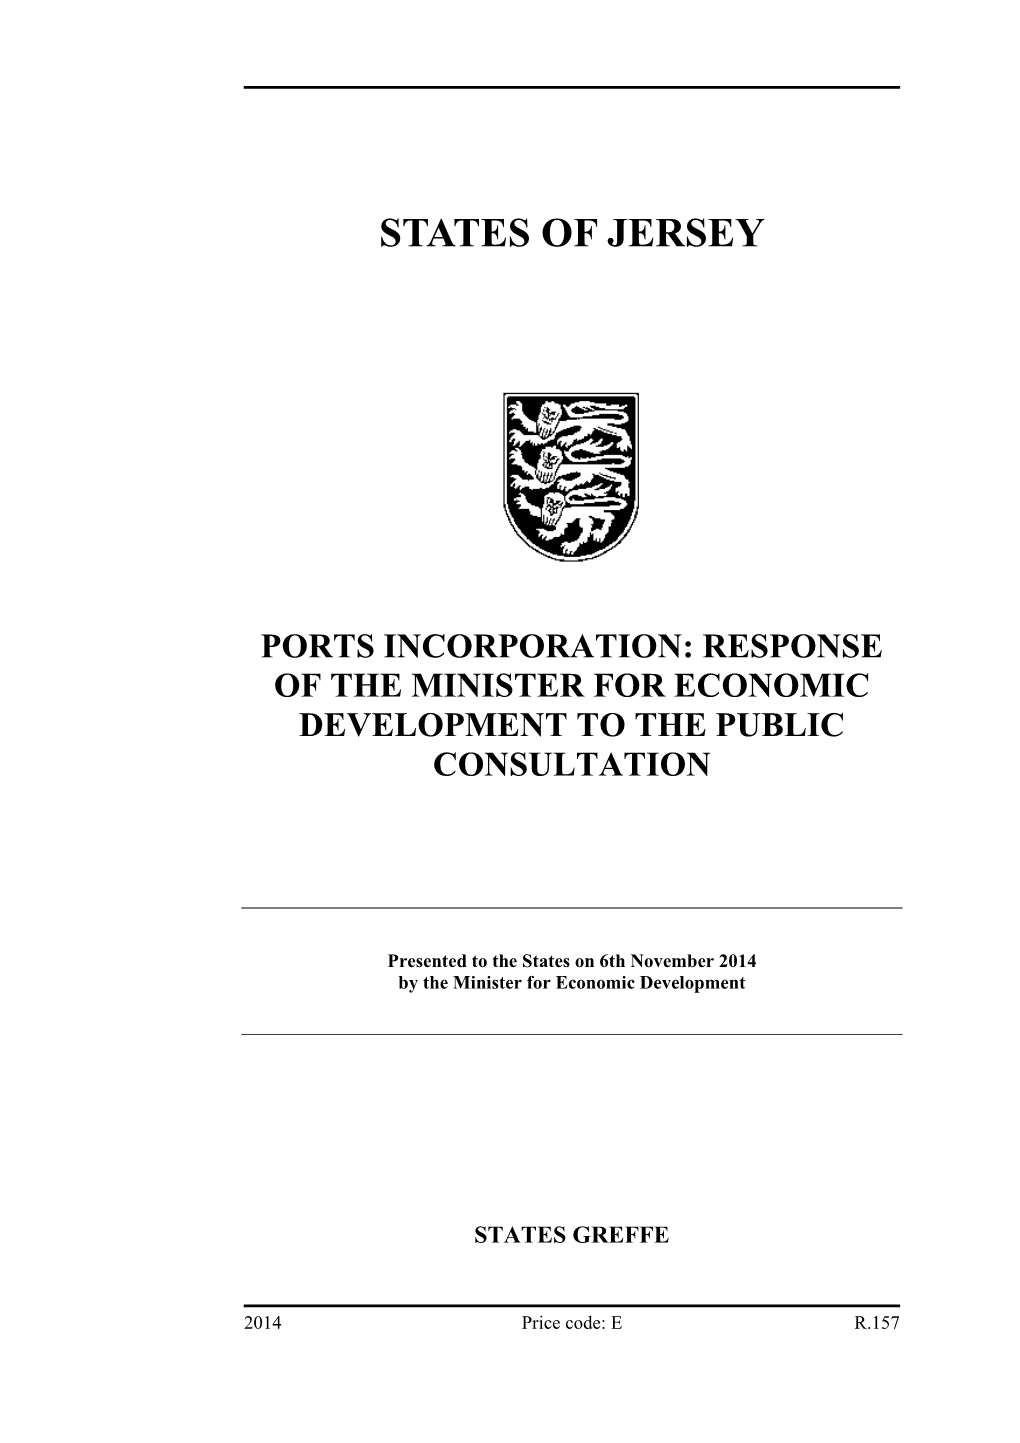 Ports Incorporation: Response of the Minister for Economic Development to the Public Consultation